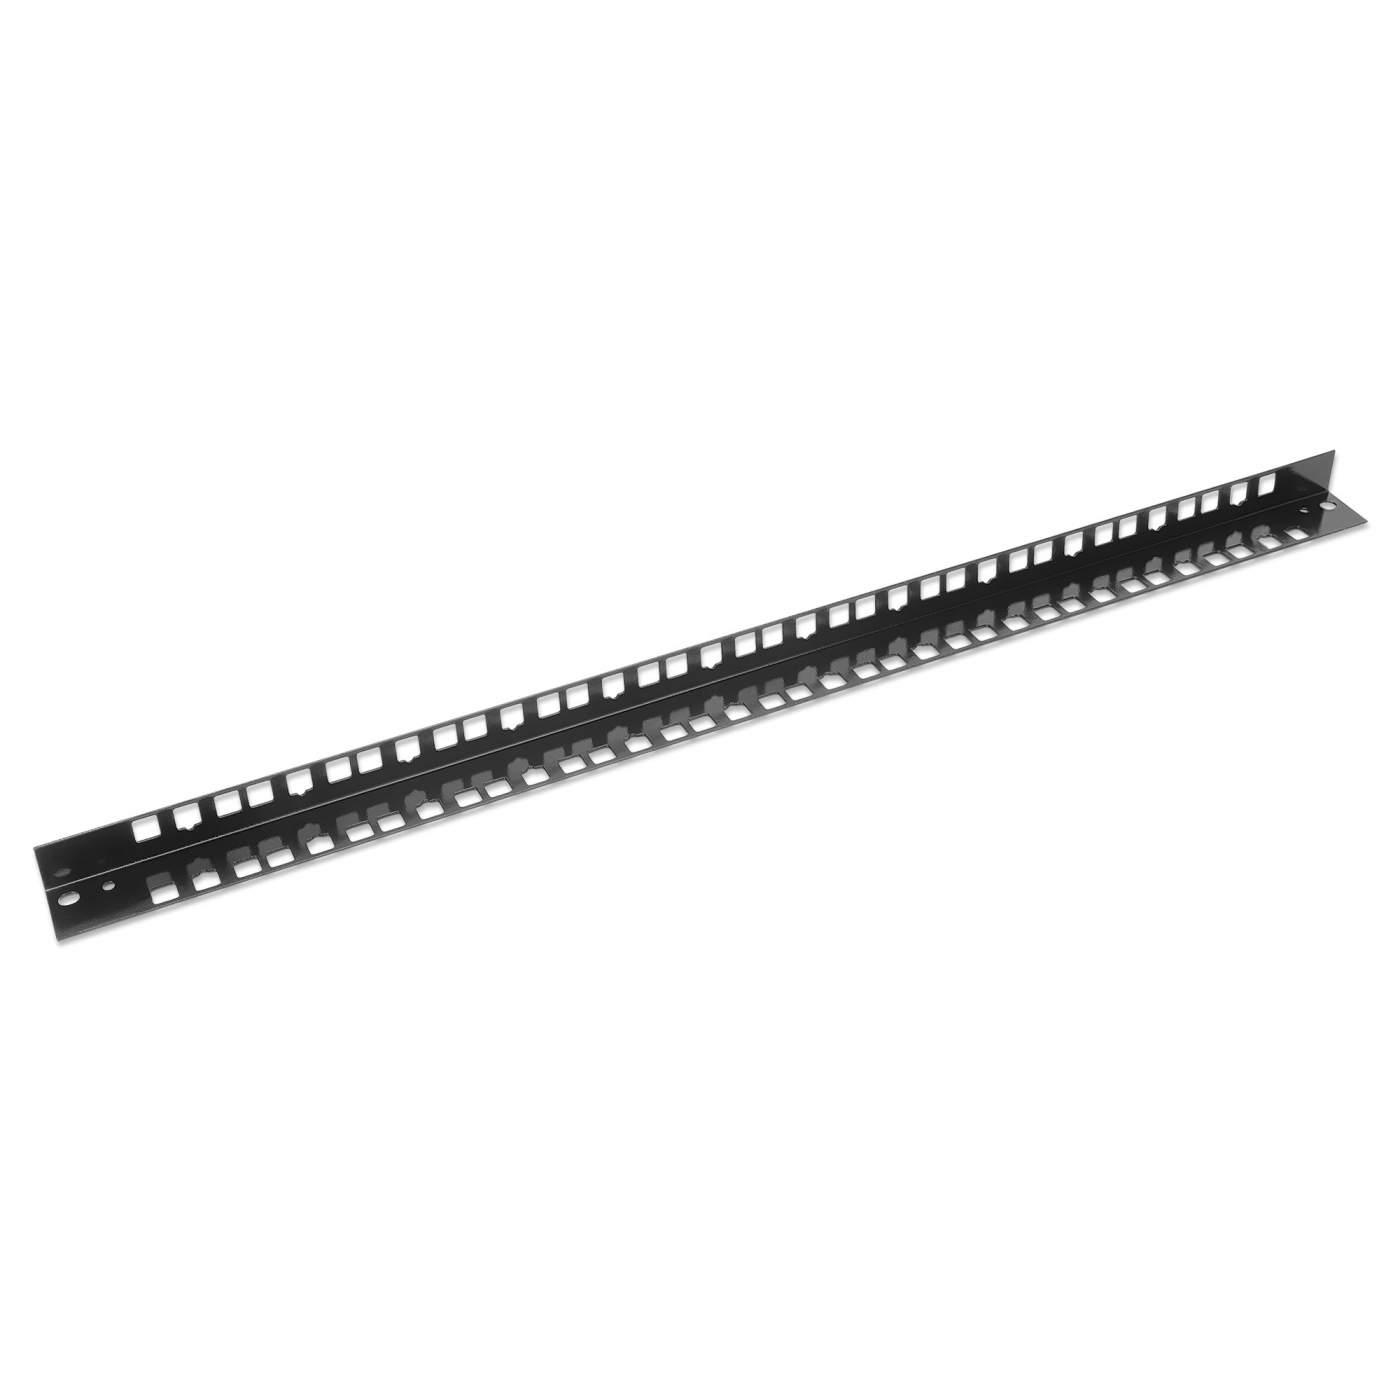 Spare Rails for 19" Wallmount Cabinets, 12U Image 2